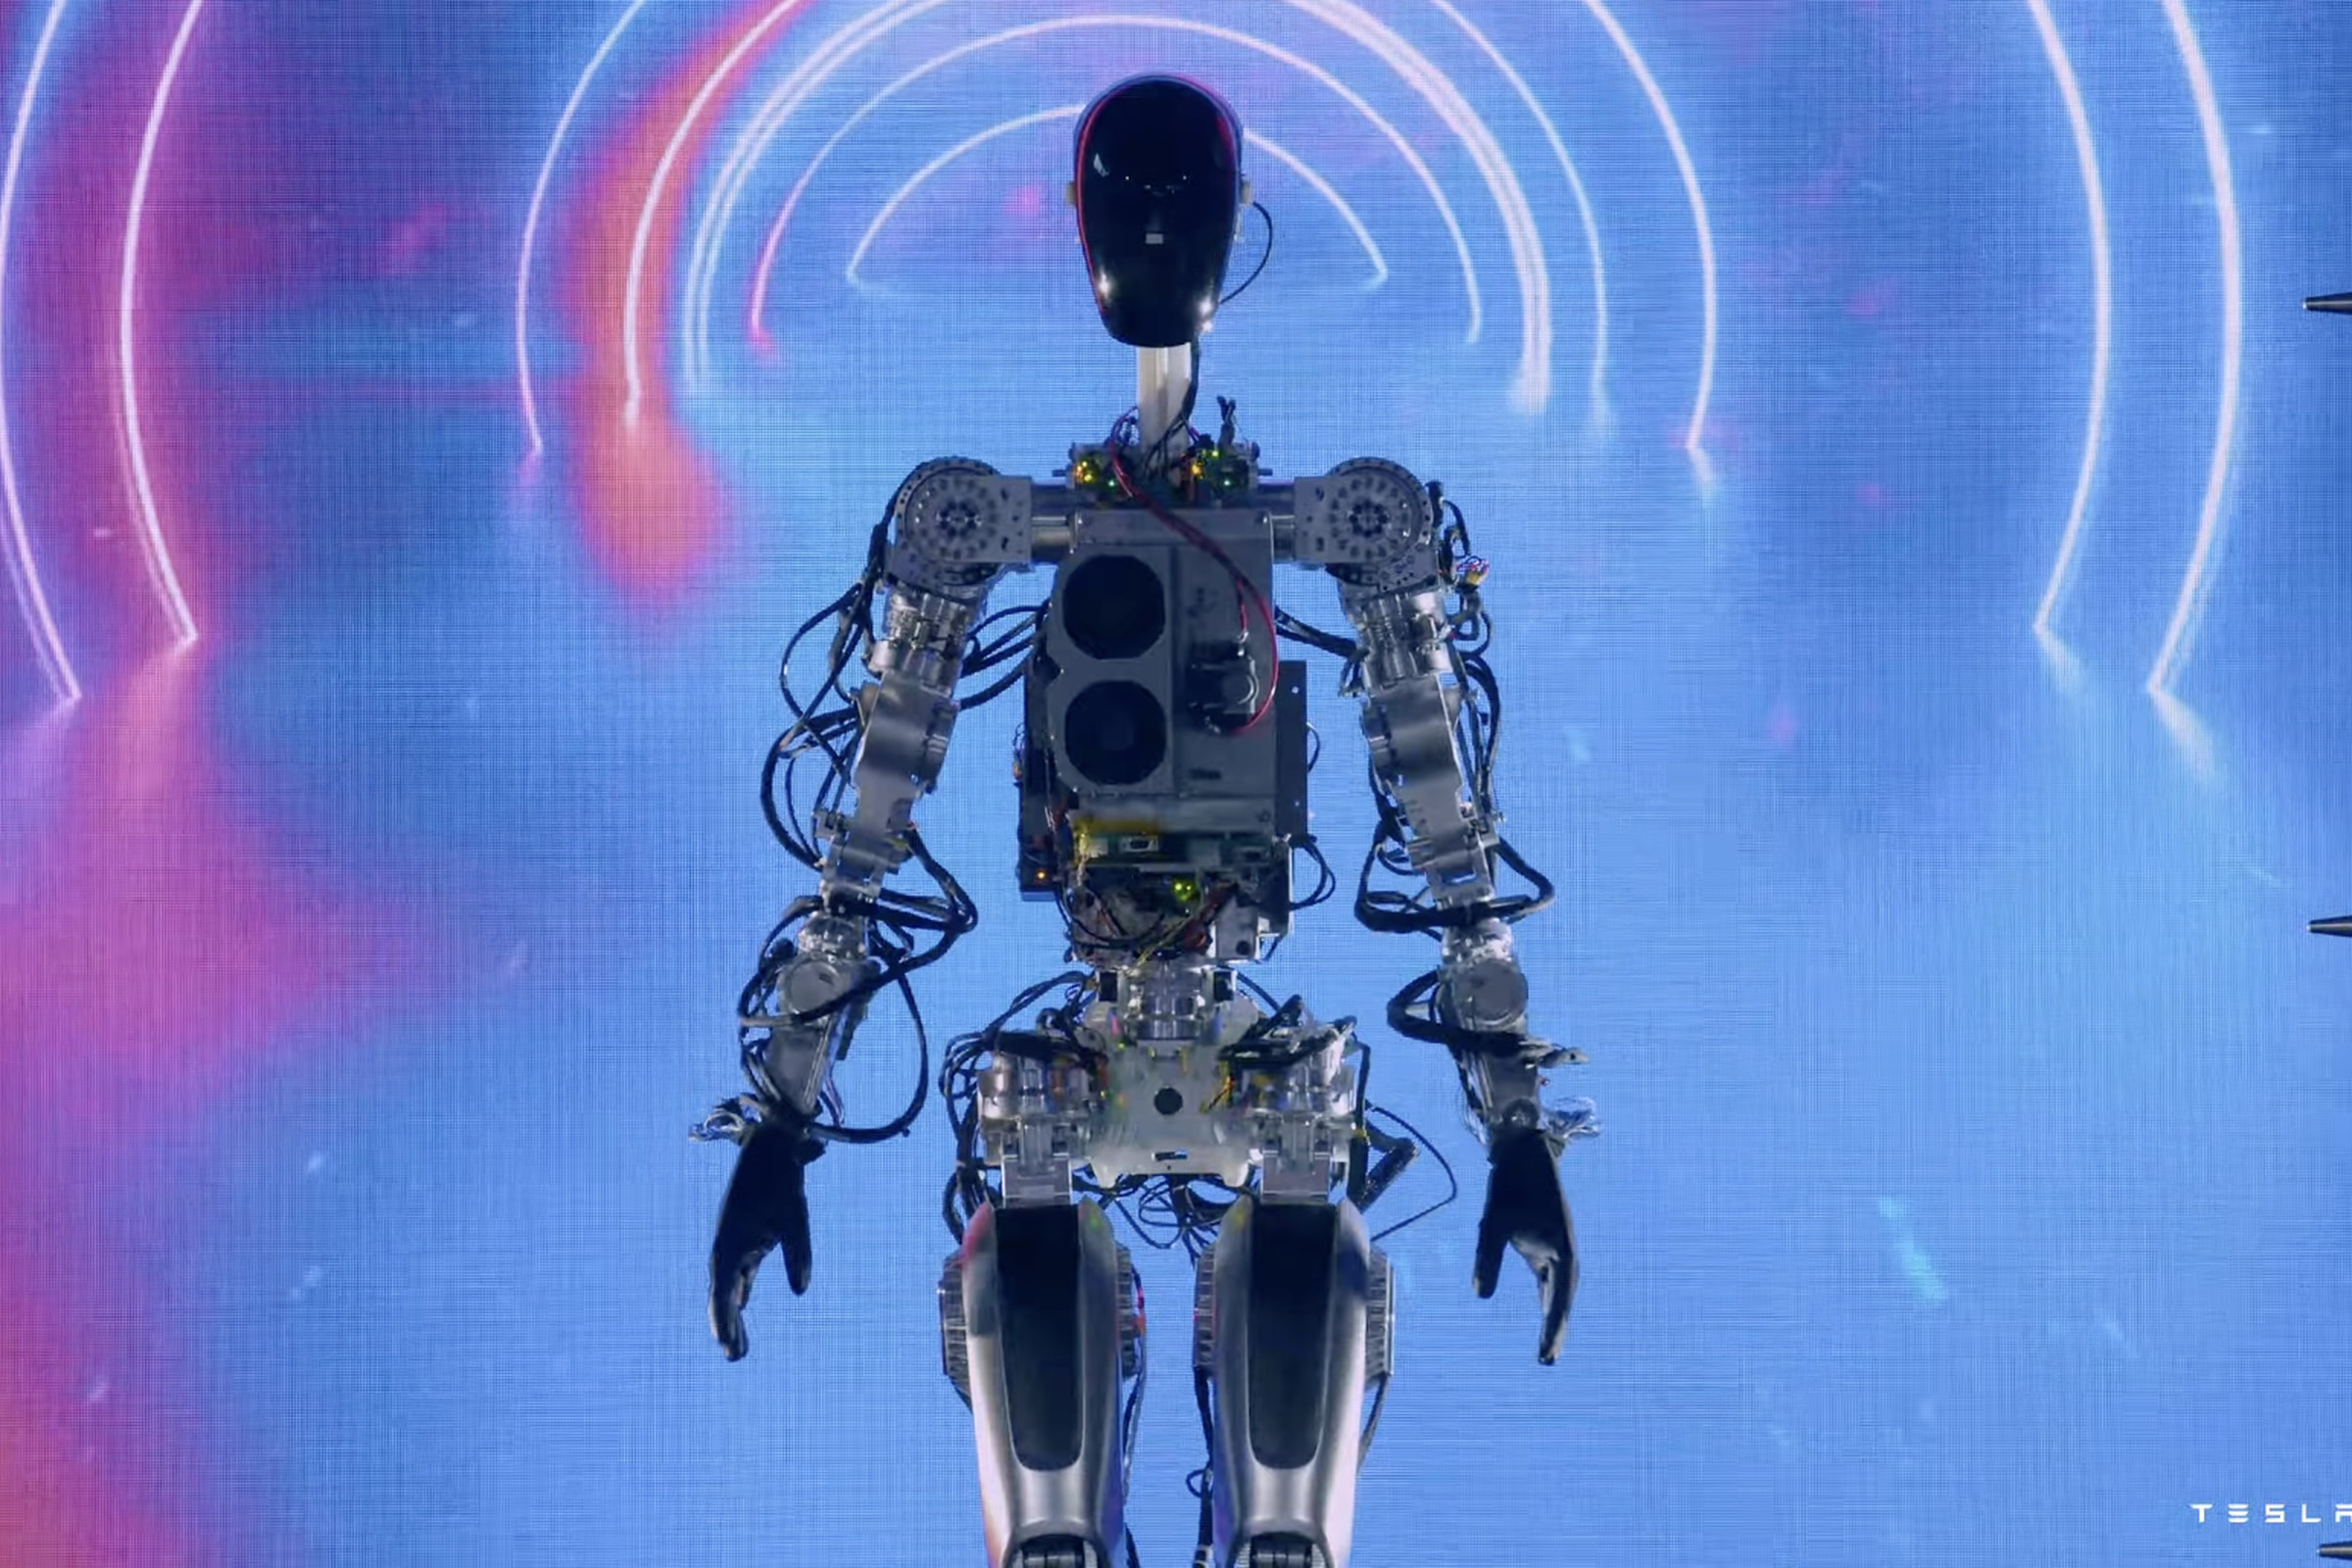 A photograph of a humanoid robot with exposed wiring and innards stands in front of a colorful screen.  